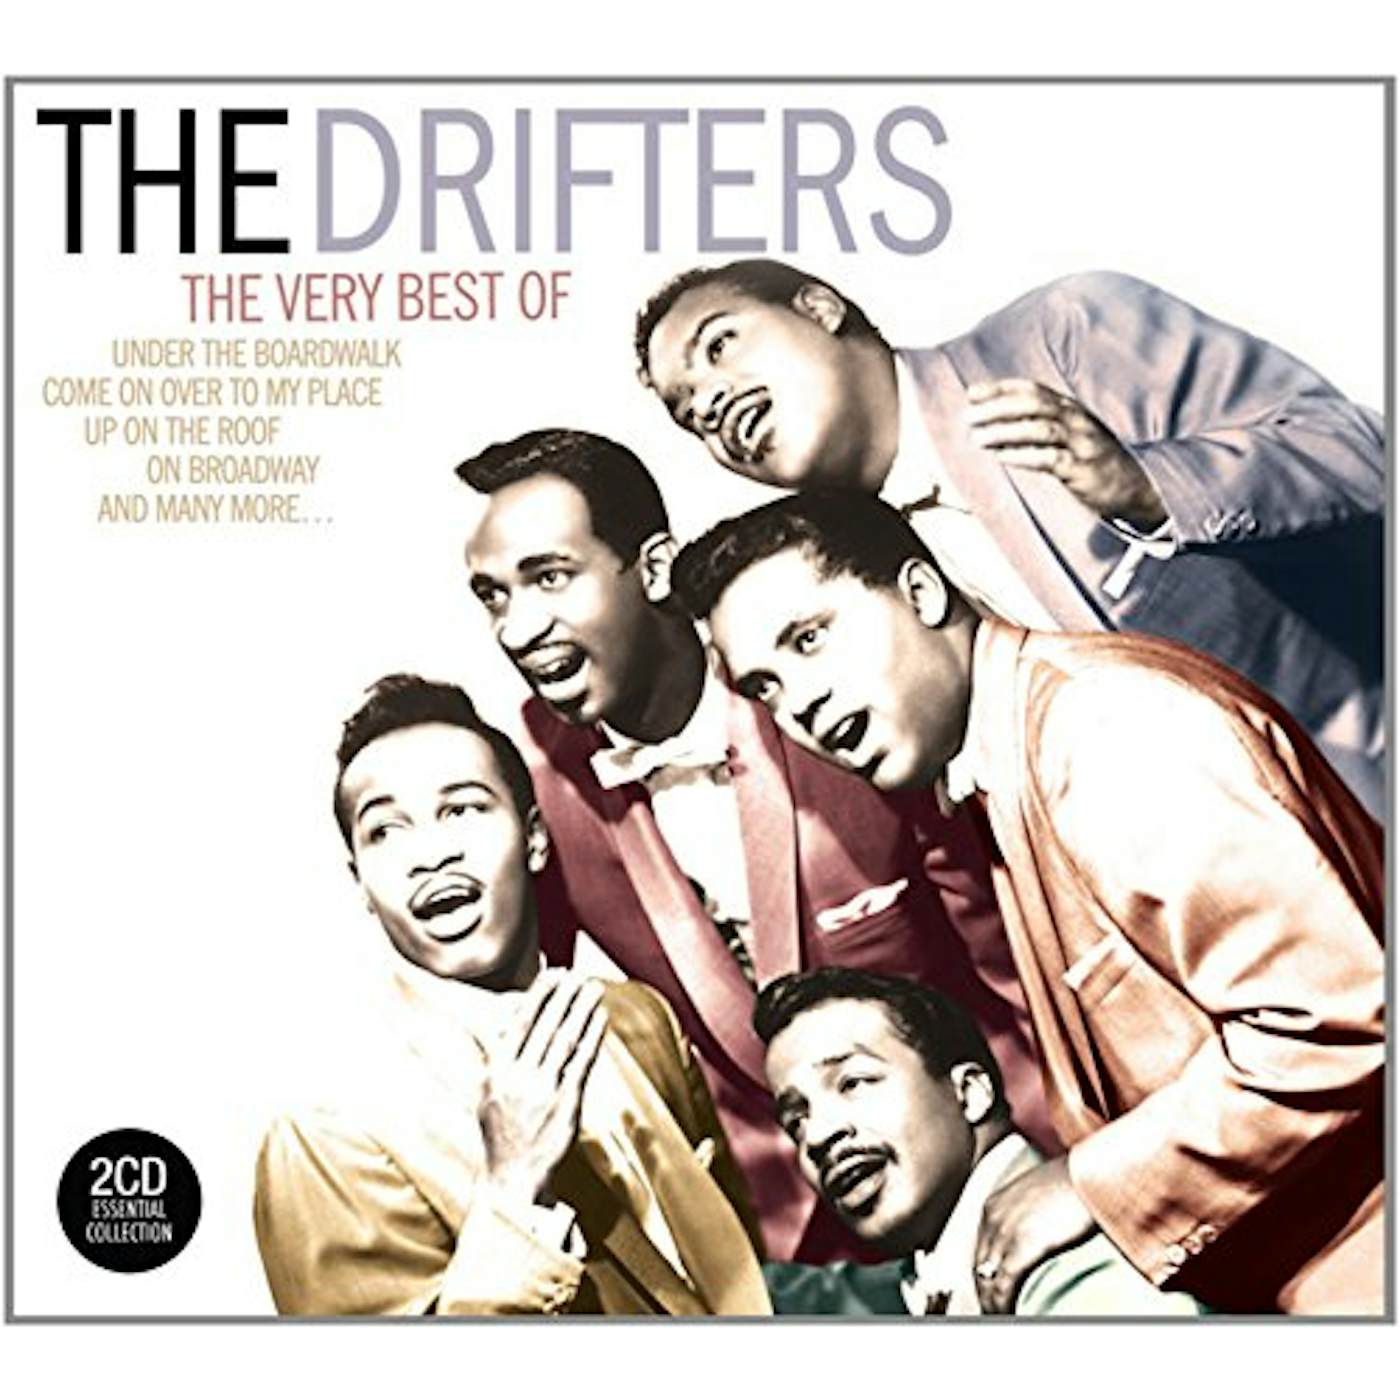 The Drifters VERY BEST OF CD